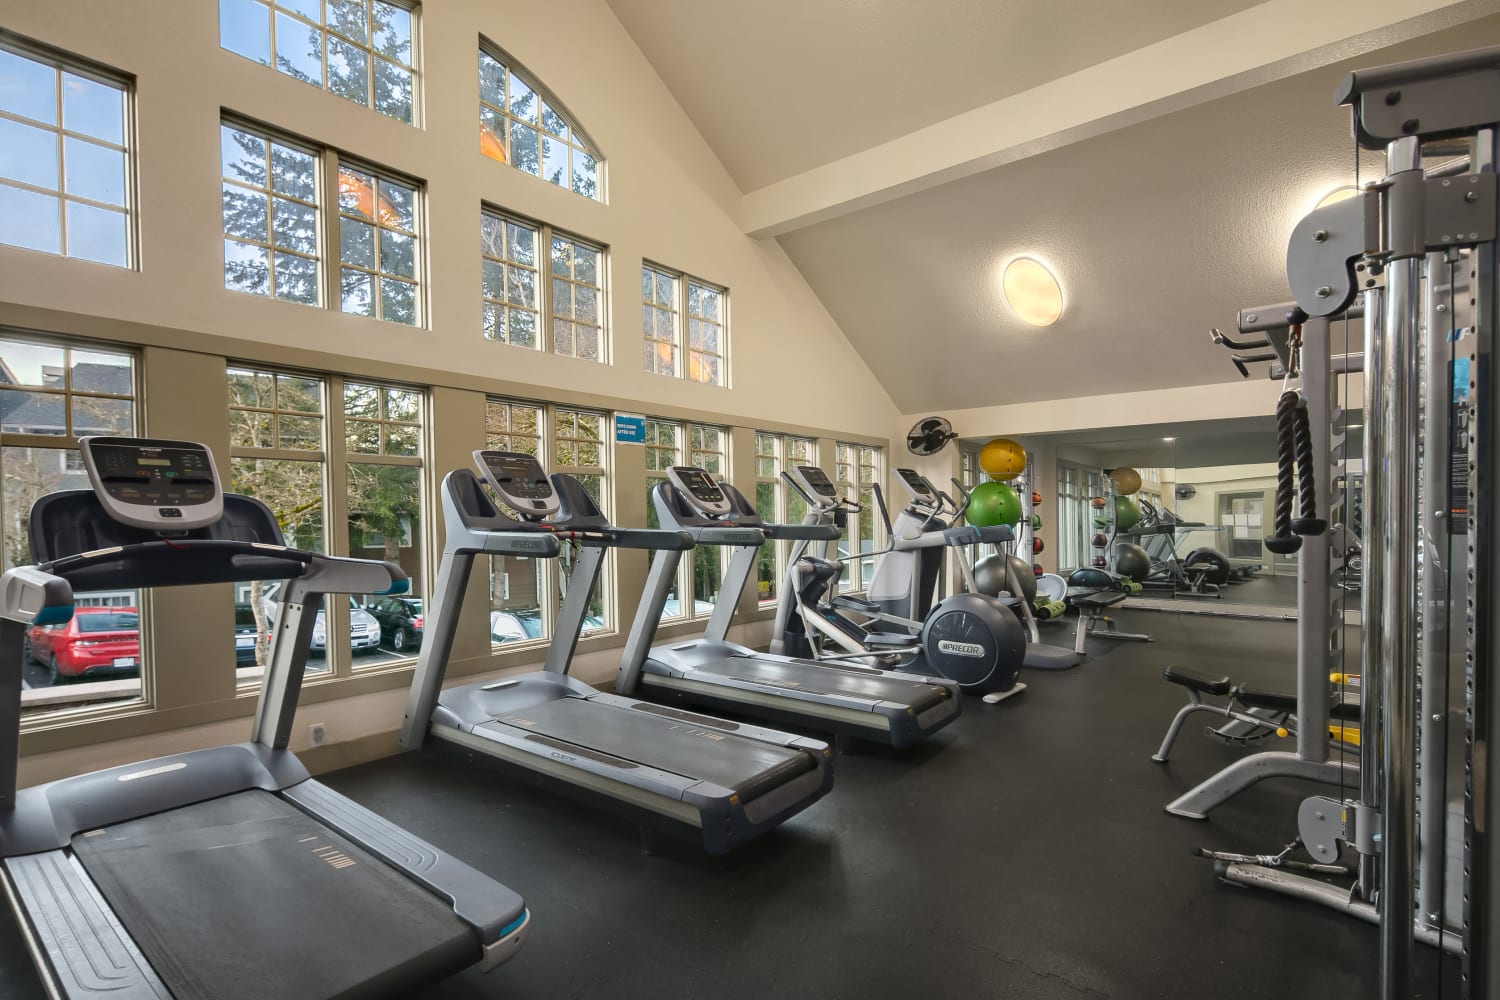 Treadmills in the fitness center at Overlook at Lakemont in Bellevue, Washington